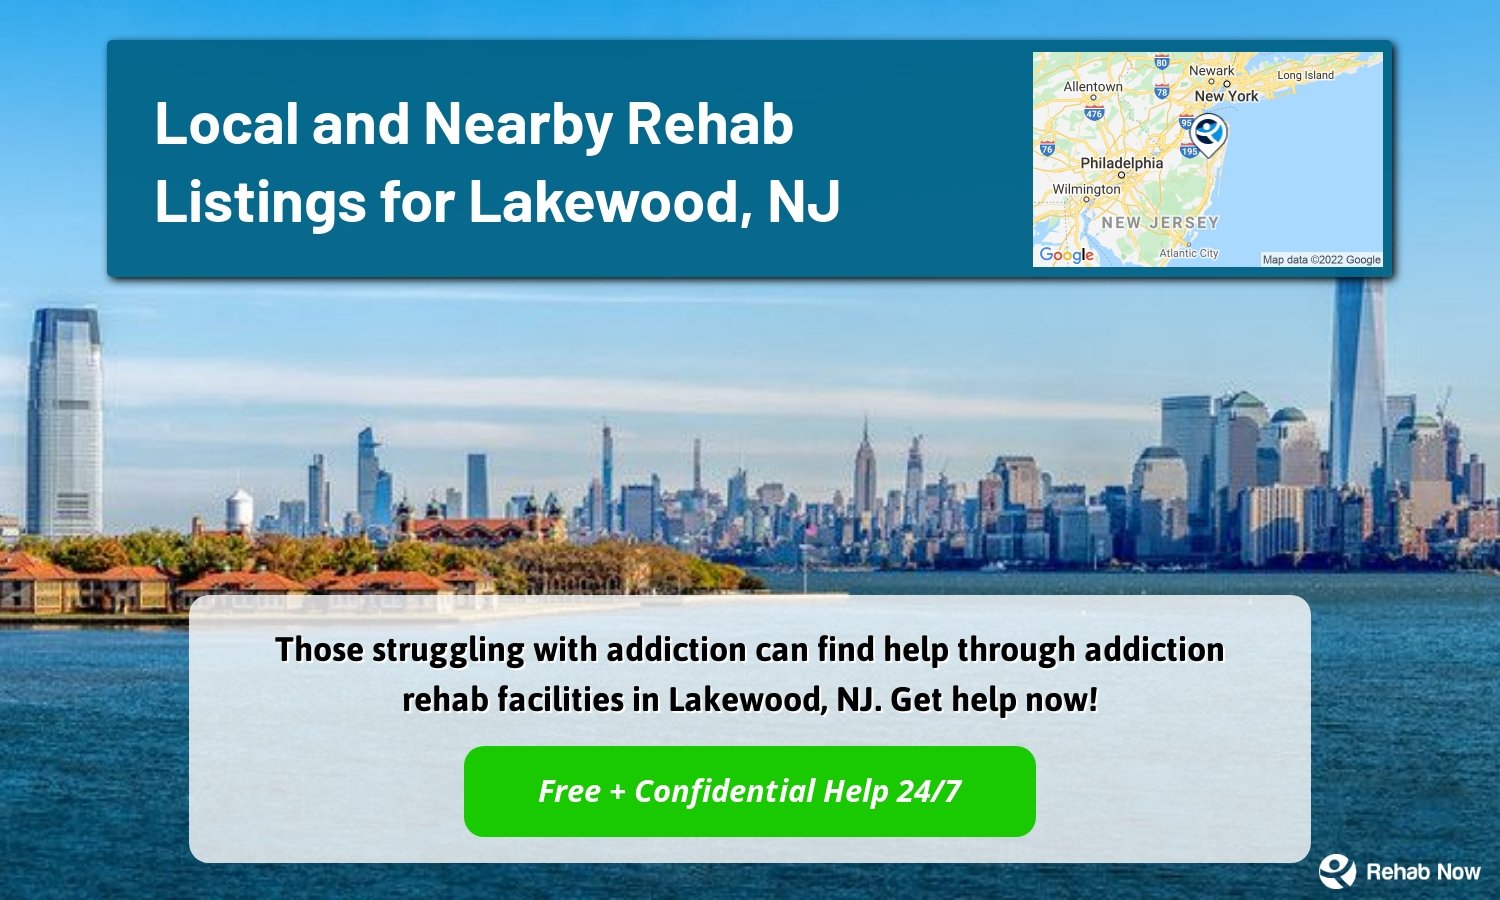 Those struggling with addiction can find help through addiction rehab facilities in Lakewood, NJ. Get help now!